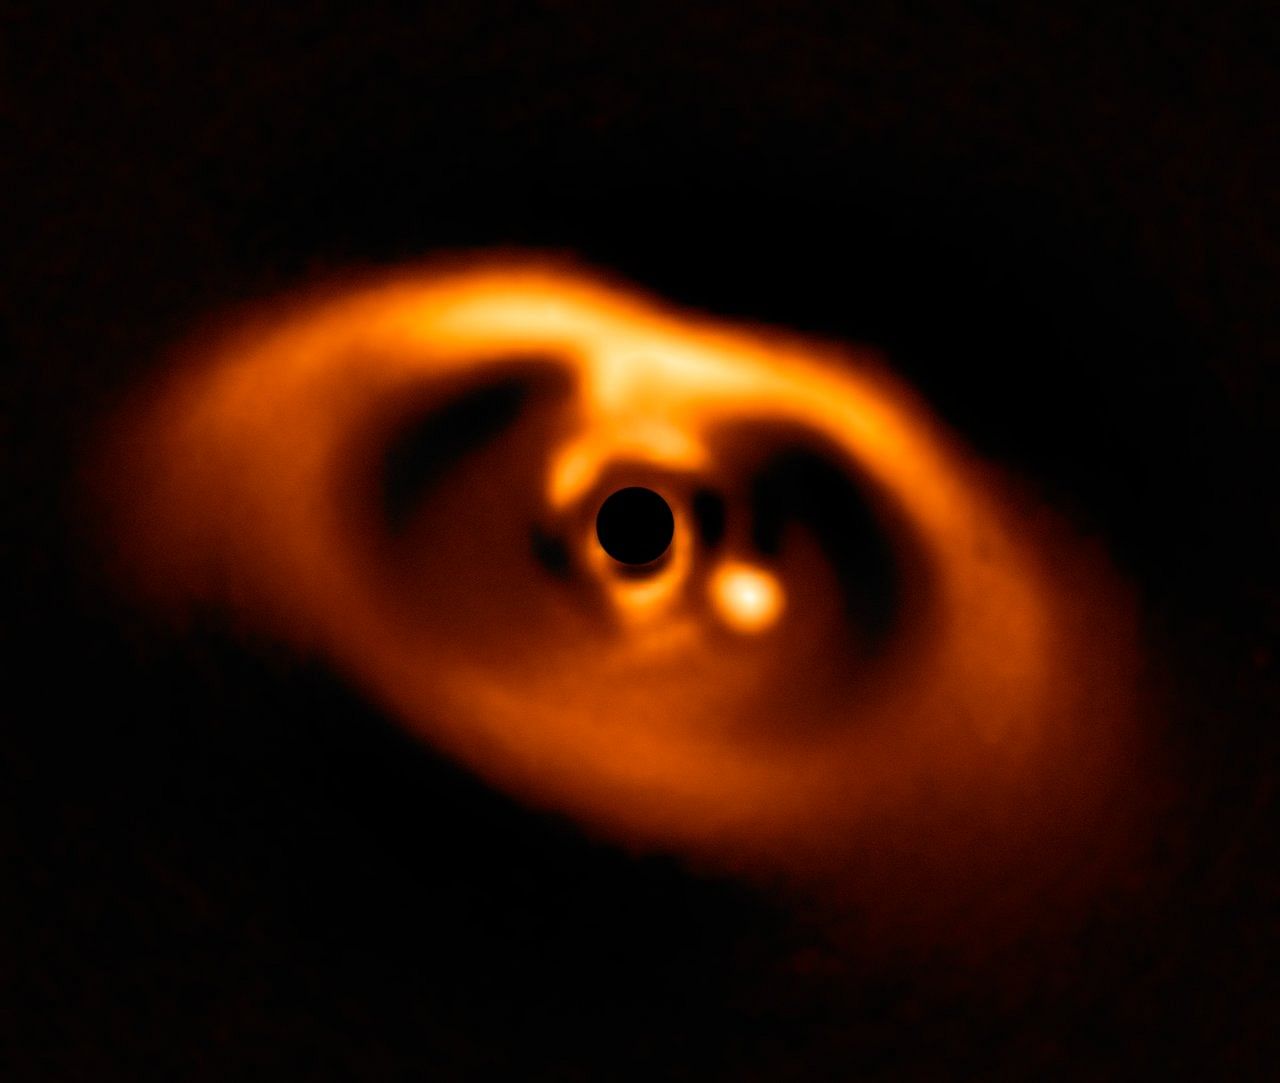 This spectacular image from the SPHERE instrument on ESO's Very Large Telescope is the first clear image of a planet caught in the very act of formation around the dwarf star PDS 70. The planet stands clearly out, visible as a bright point to the right of the centre of the image, which is blacked out by the coronagraph mask used to block the blinding light of the central star. ESO/A. Müller et al. ESO/A. Müller et al.